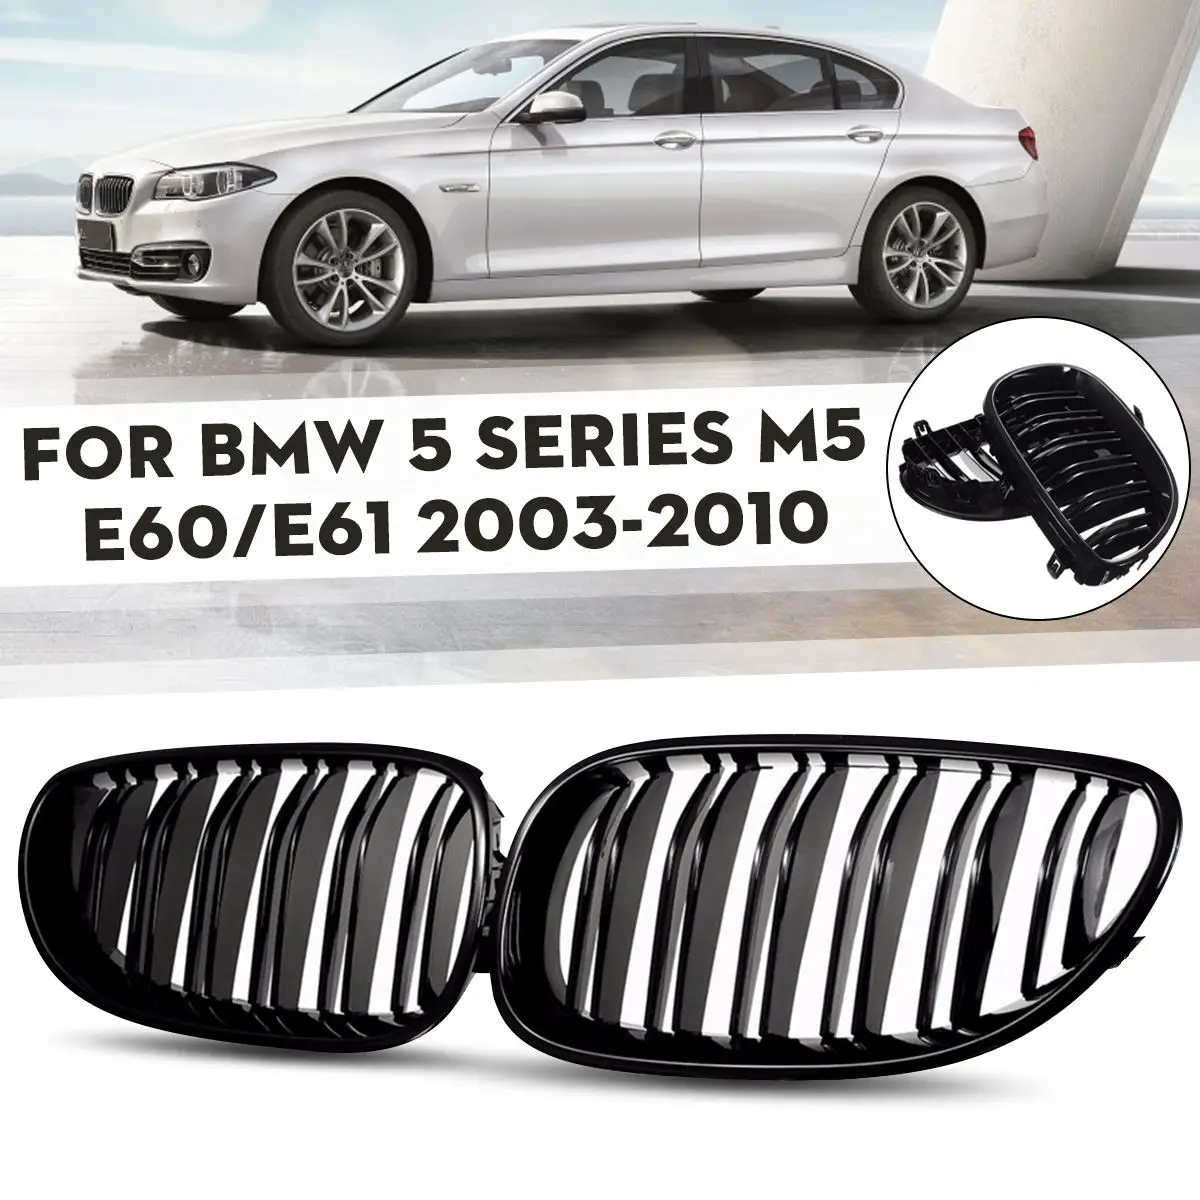 

Gloss Black Car Front Kidney Grille Grill for BMW 5 Series M5 E60 E61 2003 2004 2005 2006 2007 2008 2009 2010